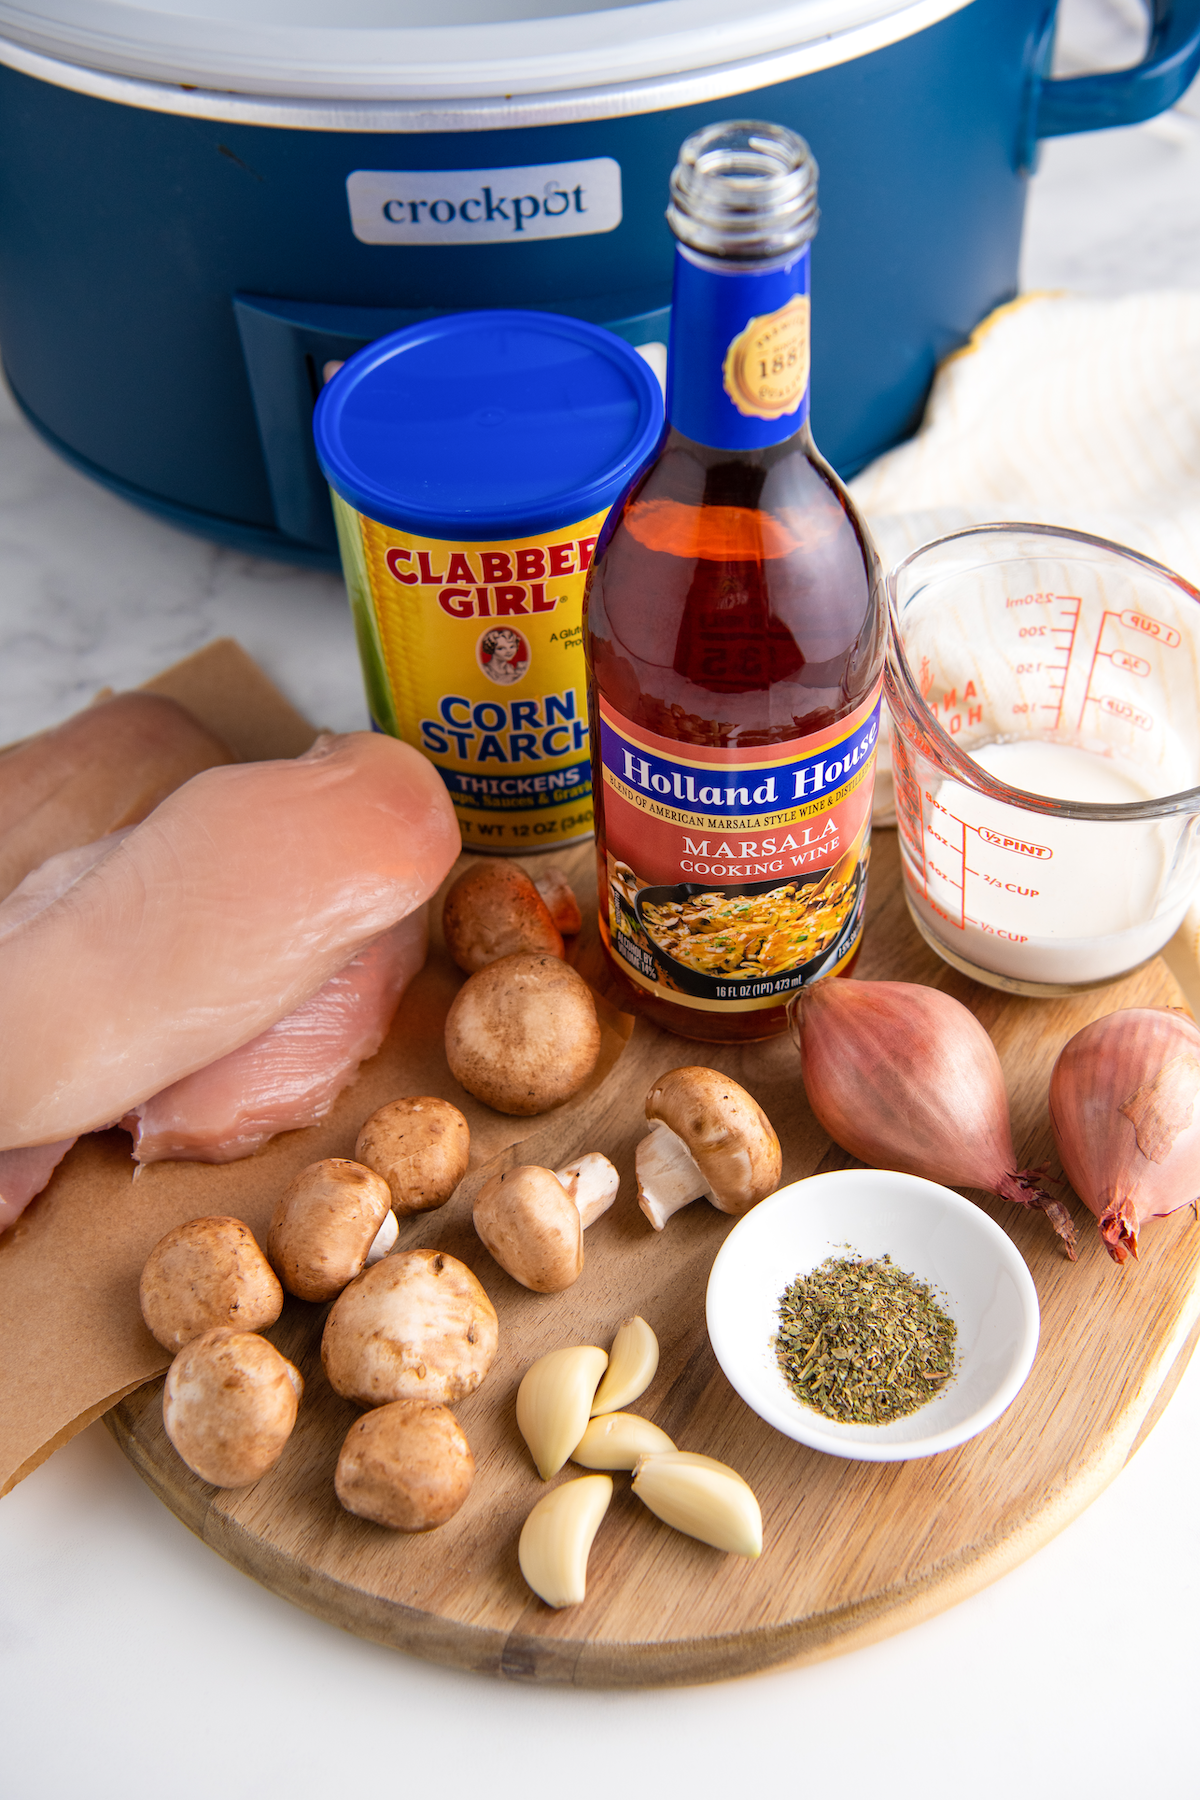 The ingredients for chicken marsala: a pile of raw chicken breasts, a bunch of mushrooms, two shallots, a bowl of Italian seasoning, a pyrex of cream, a bottle of marsala wine, and a tin of corn starch